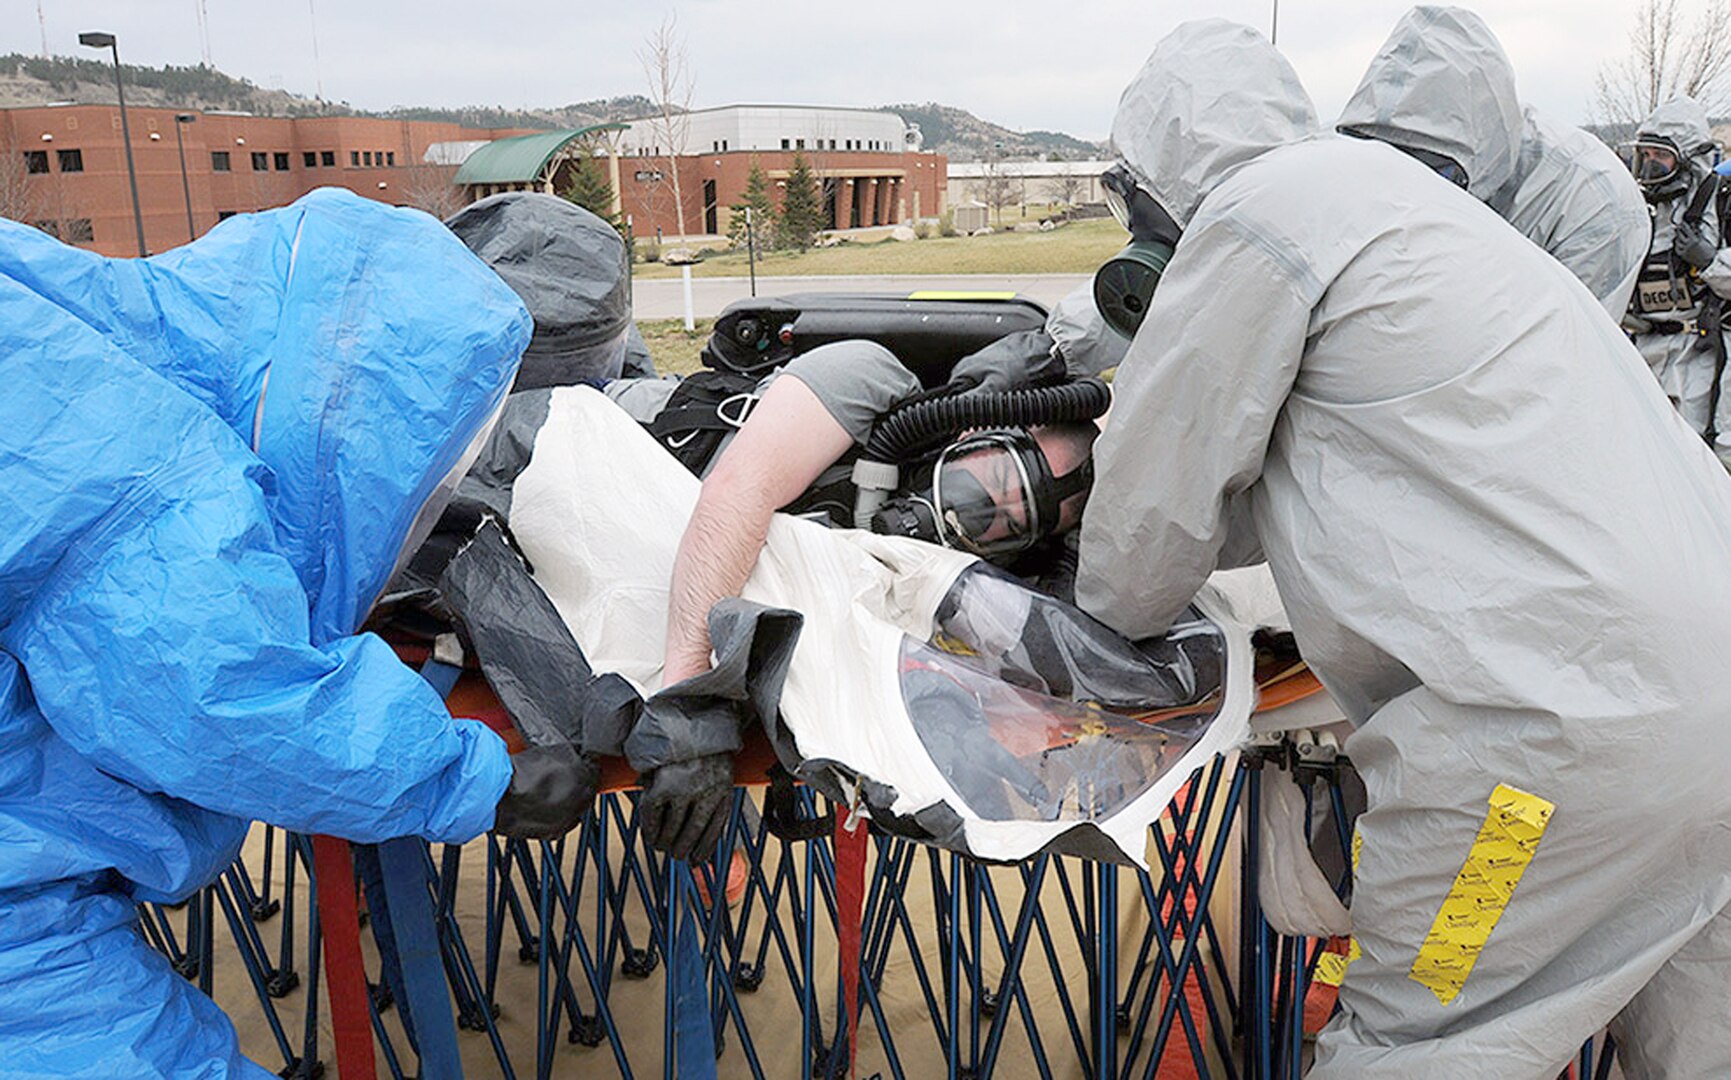 Members of the South
Dakota National Guard’s
82nd Civil Support Team
move mock injury patient
Army Spc. Robert Clausen
through the decontamination
process during a
training exercise April 22
at Camp Rapid in Rapid
City, S.D. The exercise,
facilitated by U.S. Army
North’s Civil Support Training
Activity, is designed
to test the unit’s ability
to respond to a chemical,
biological, radiological or
nuclear incident. The CSTA
is based out of Joint Base
San Antonio-Fort Sam
Houston.

Photos by Sgt. 1st Class Theanne Tangen